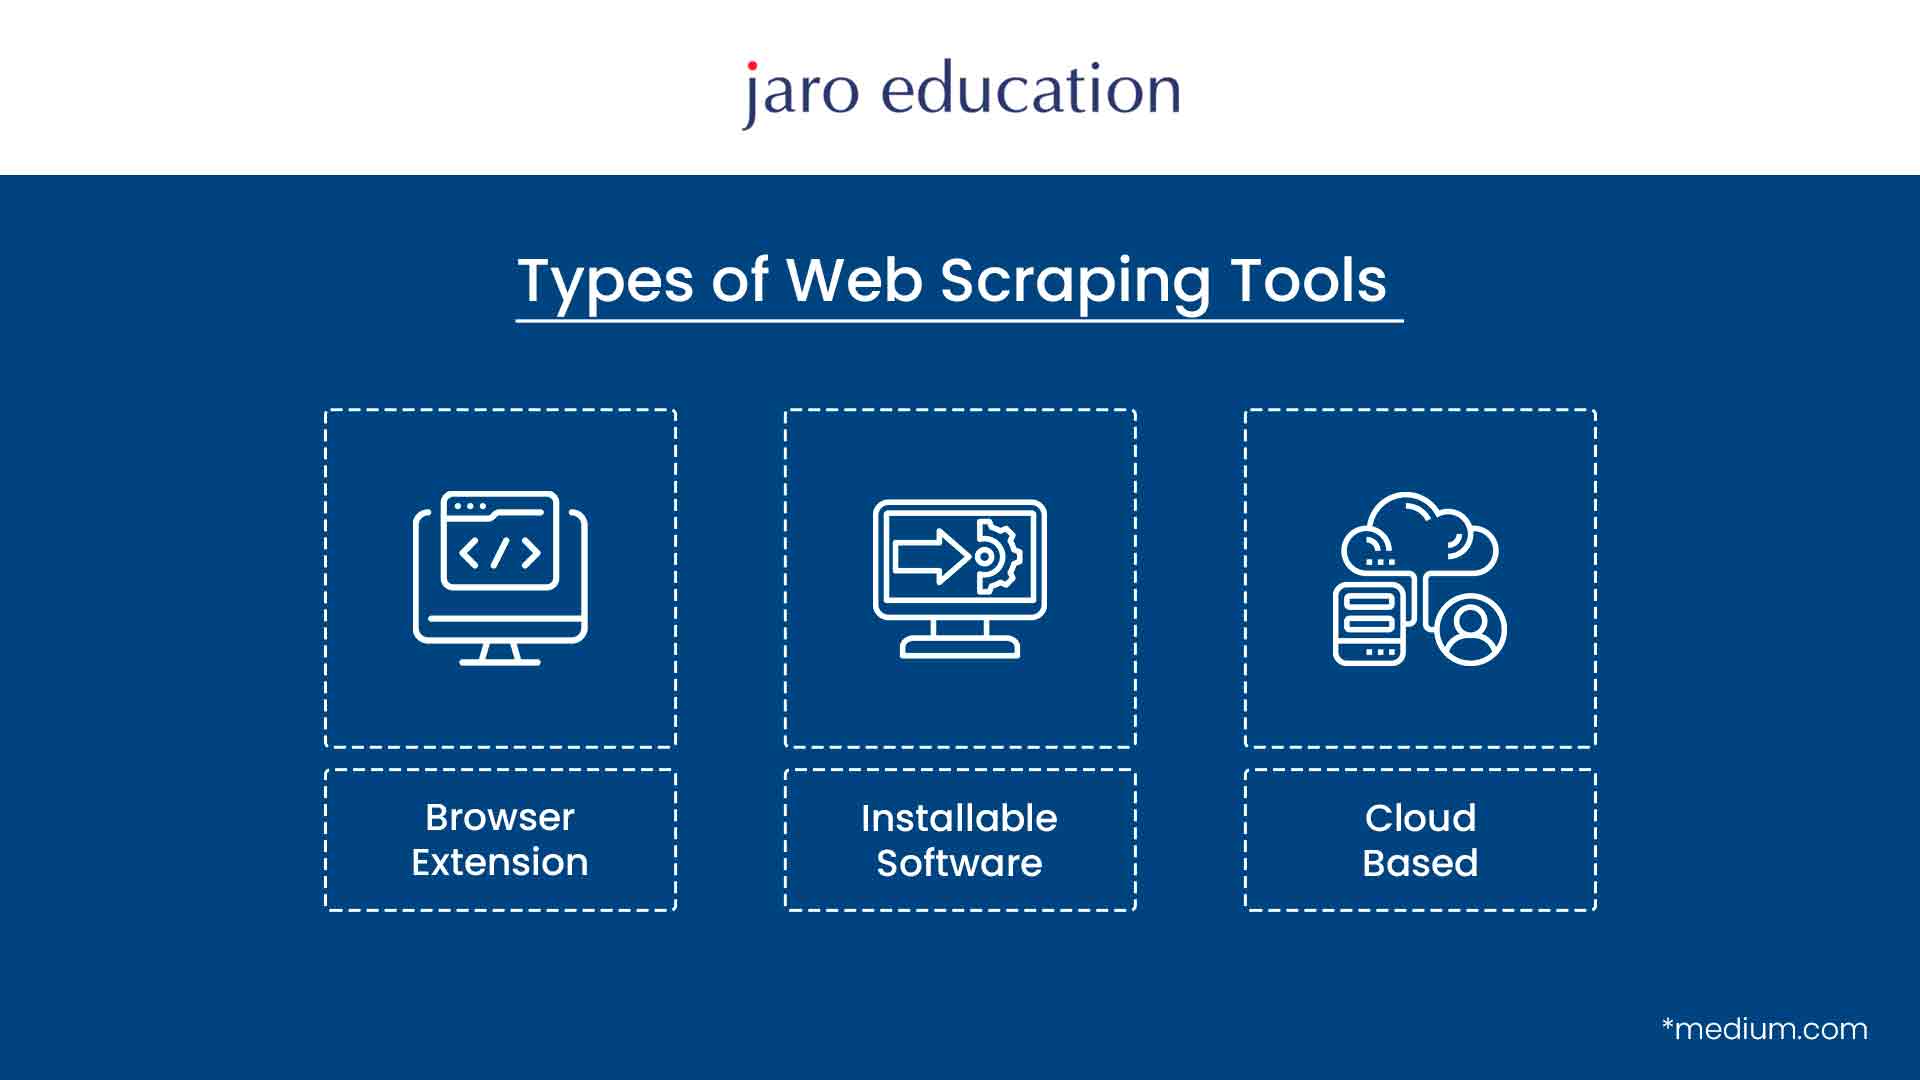 Types of Web Scraping Tools